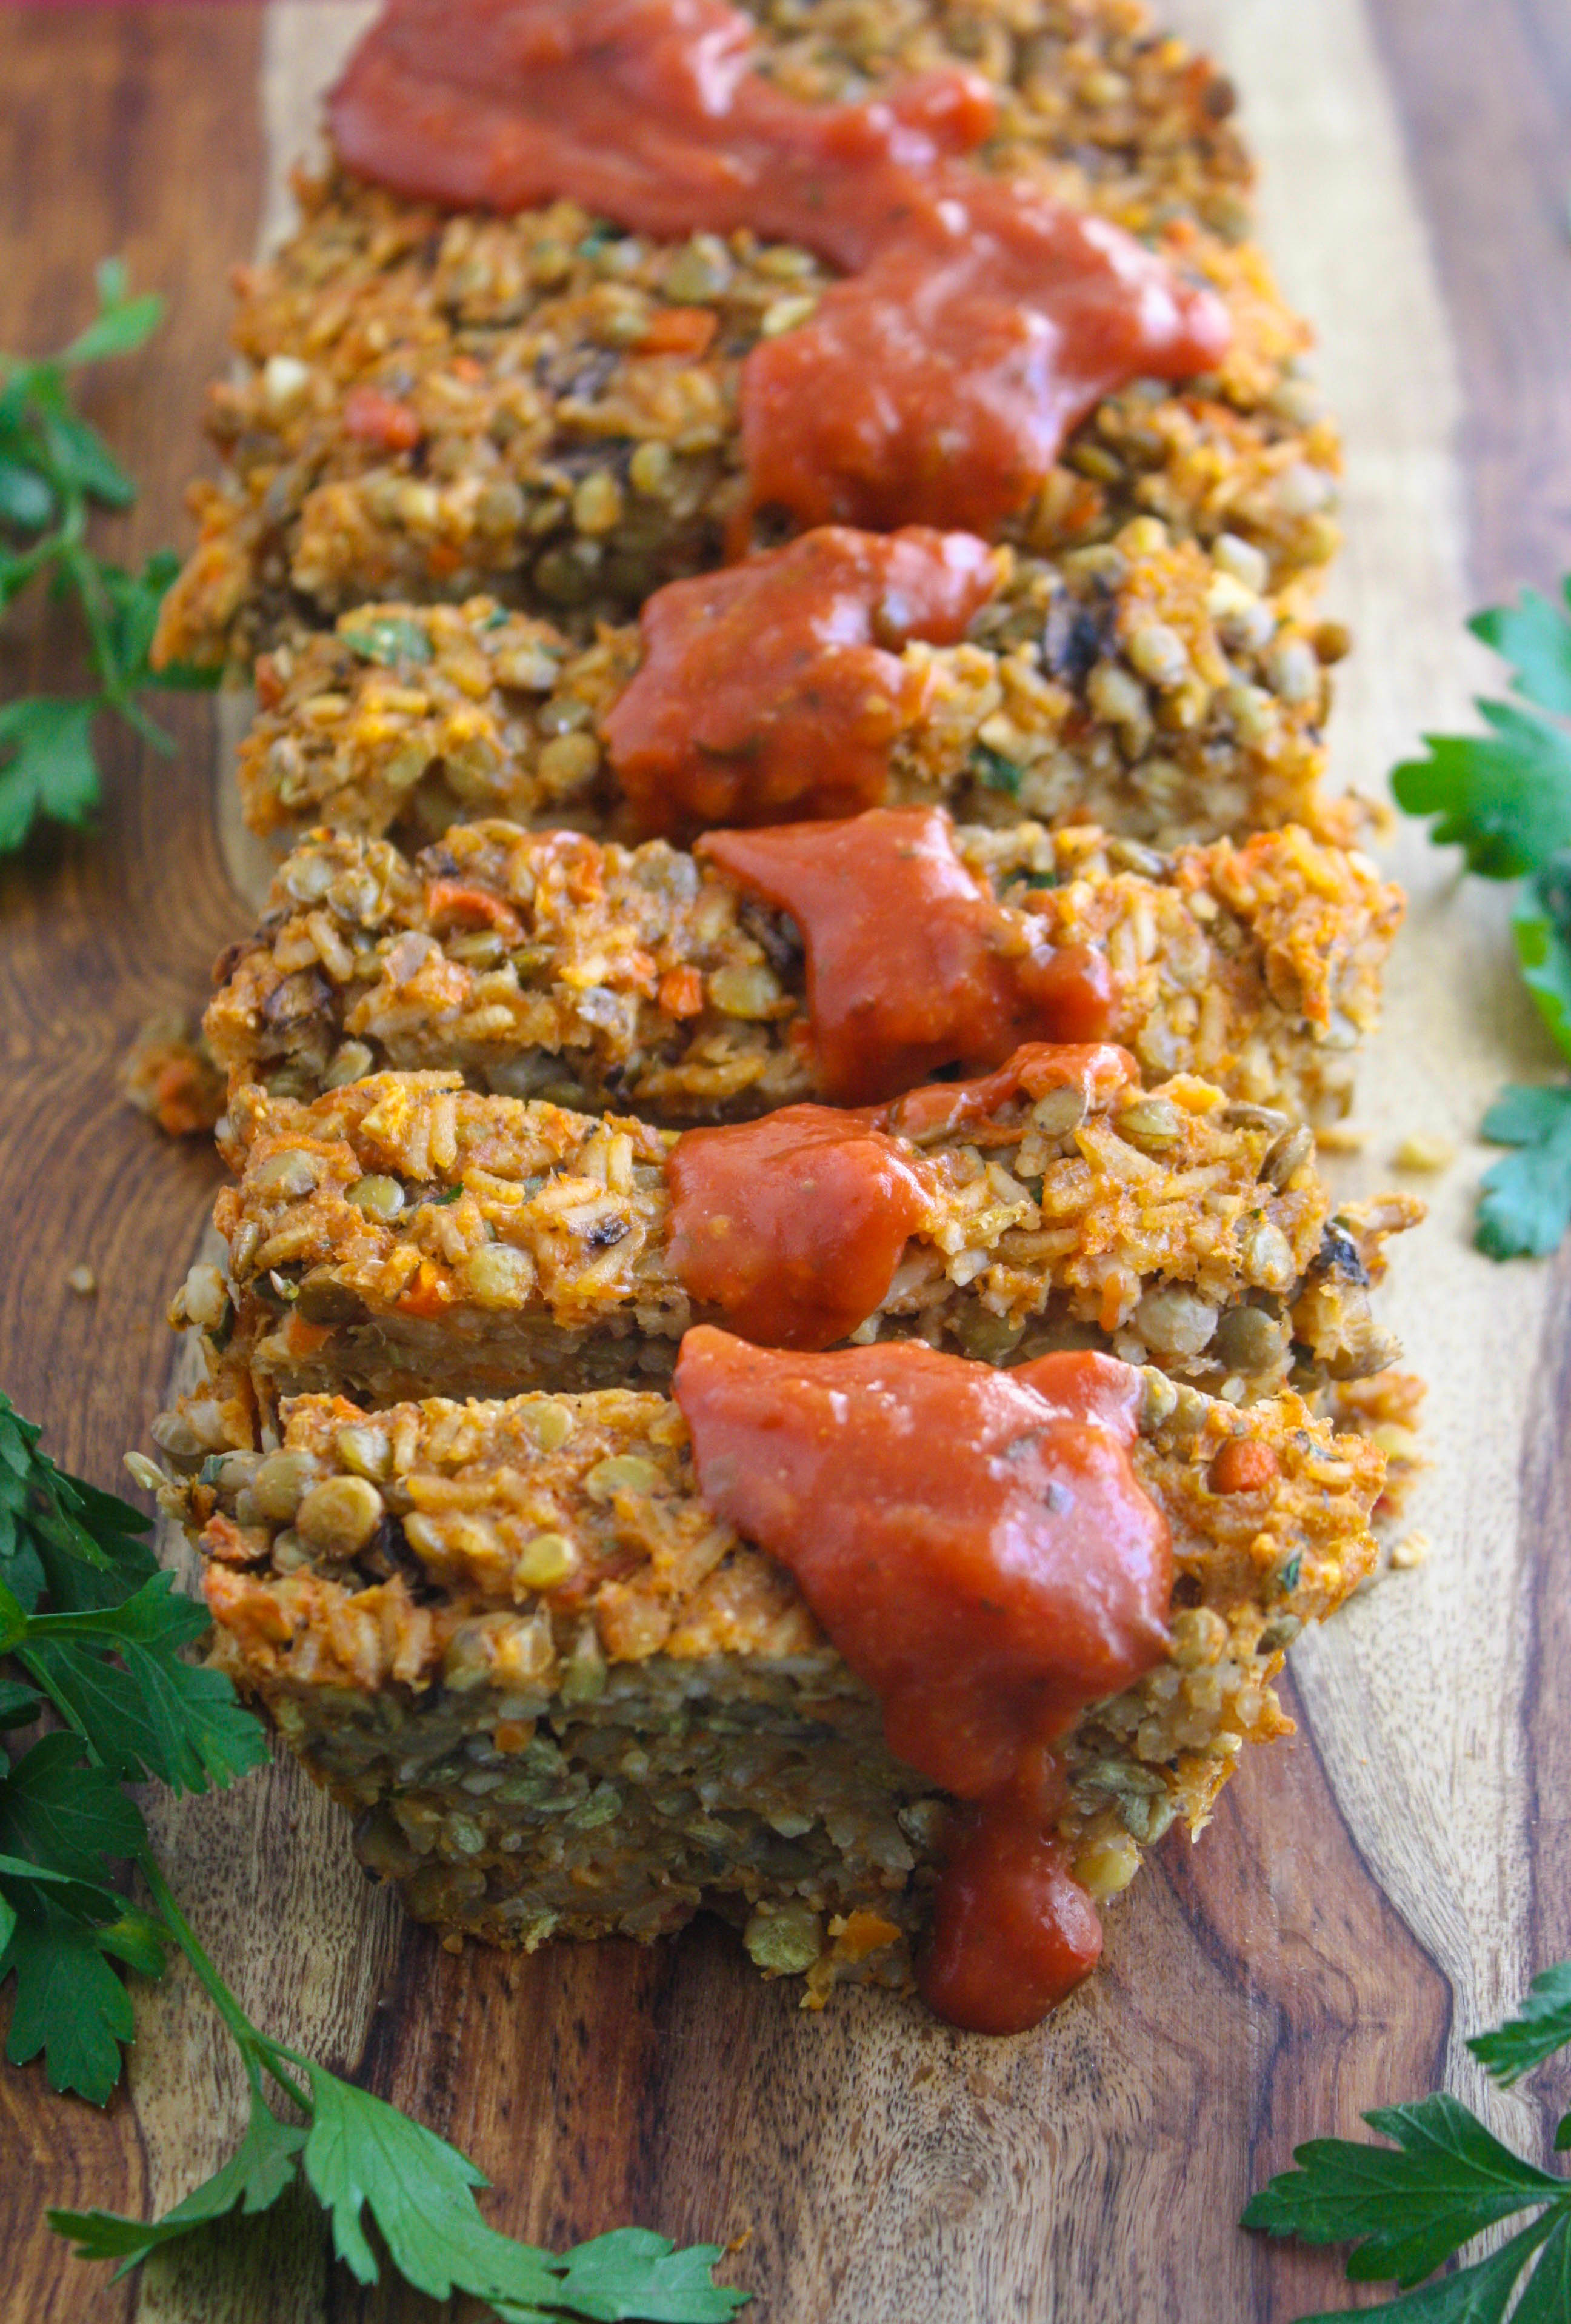 Rice and Lentil Loaf is the perfect dish to serve on Meatless Monday. This is a classic dish everyone will enjoy for dinner.